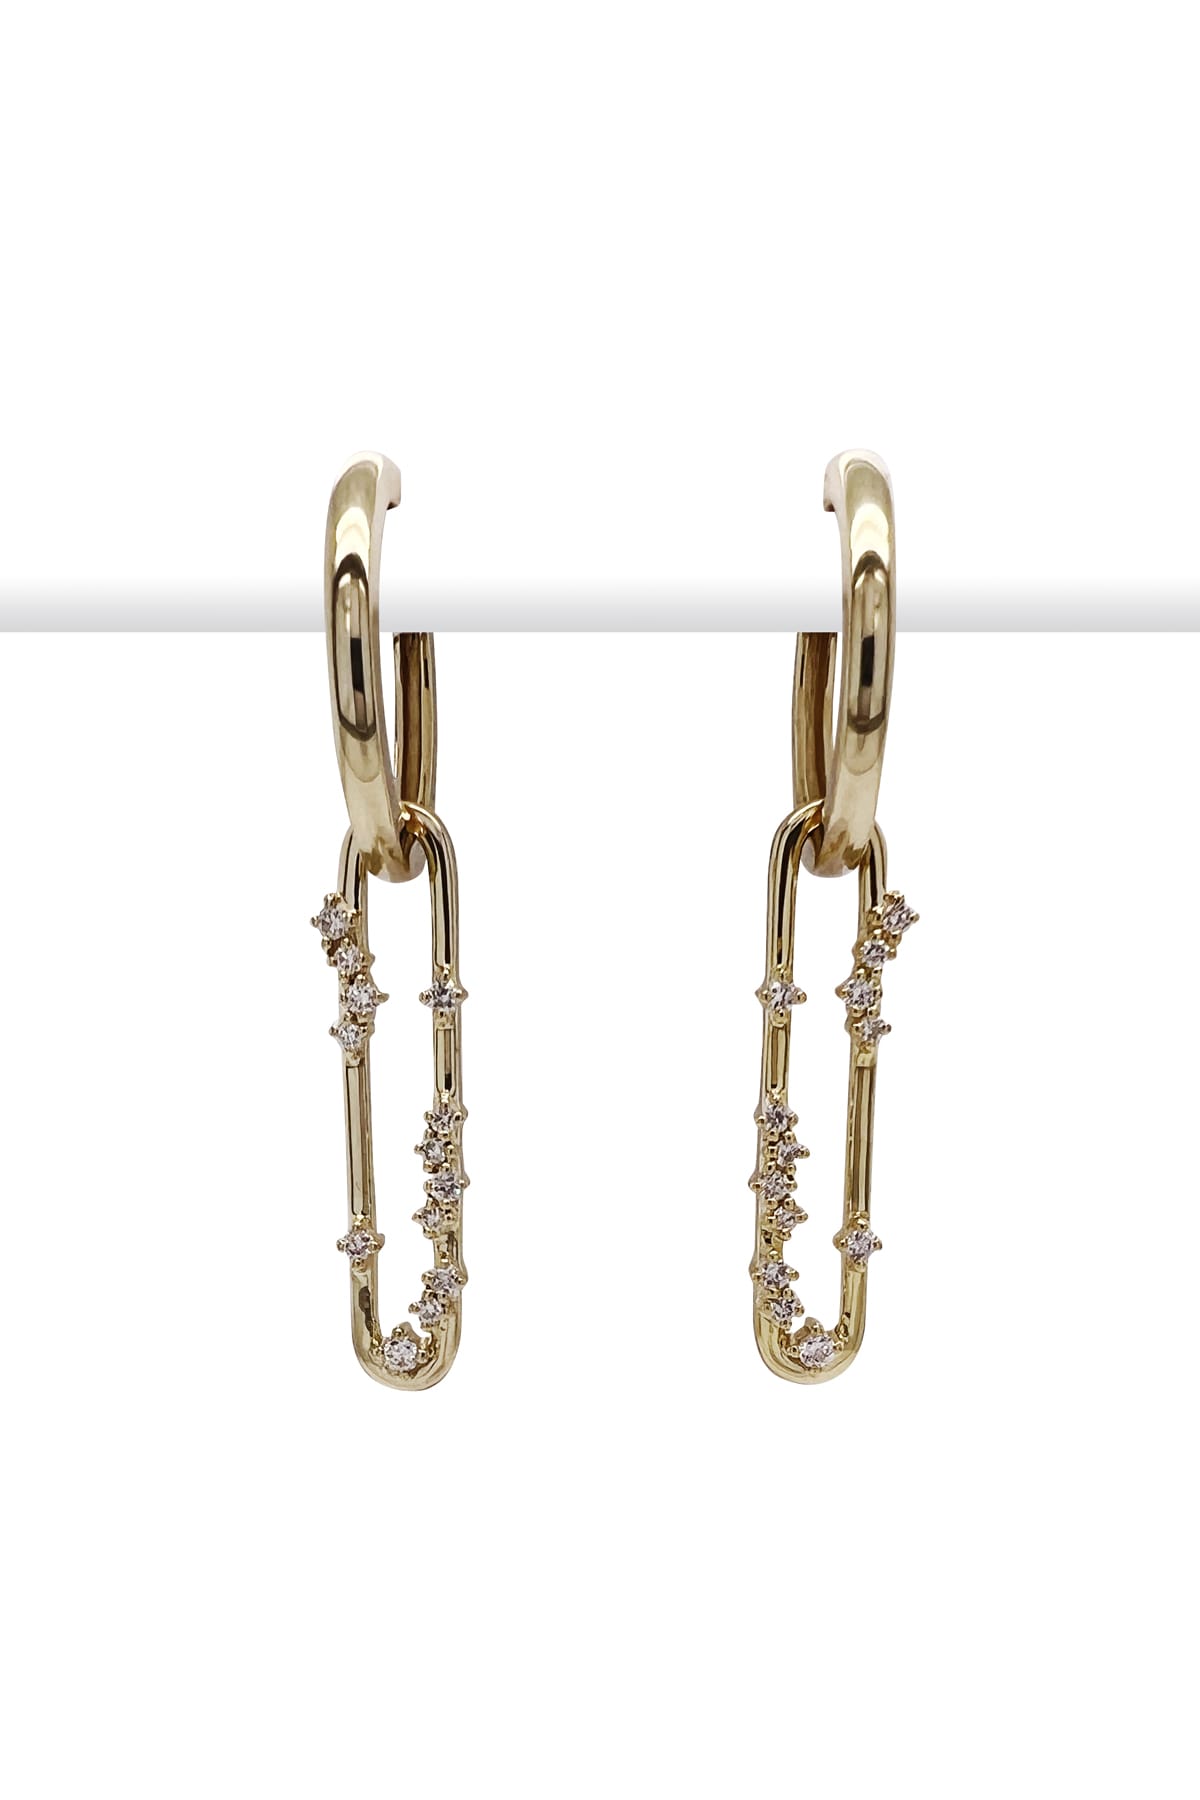 Huggie Drop 0.25ct Diamond Set Earrings set in 9ct Yellow Gold available at LeGassick Diamonds and Jewellery Gold Coast, Australia.